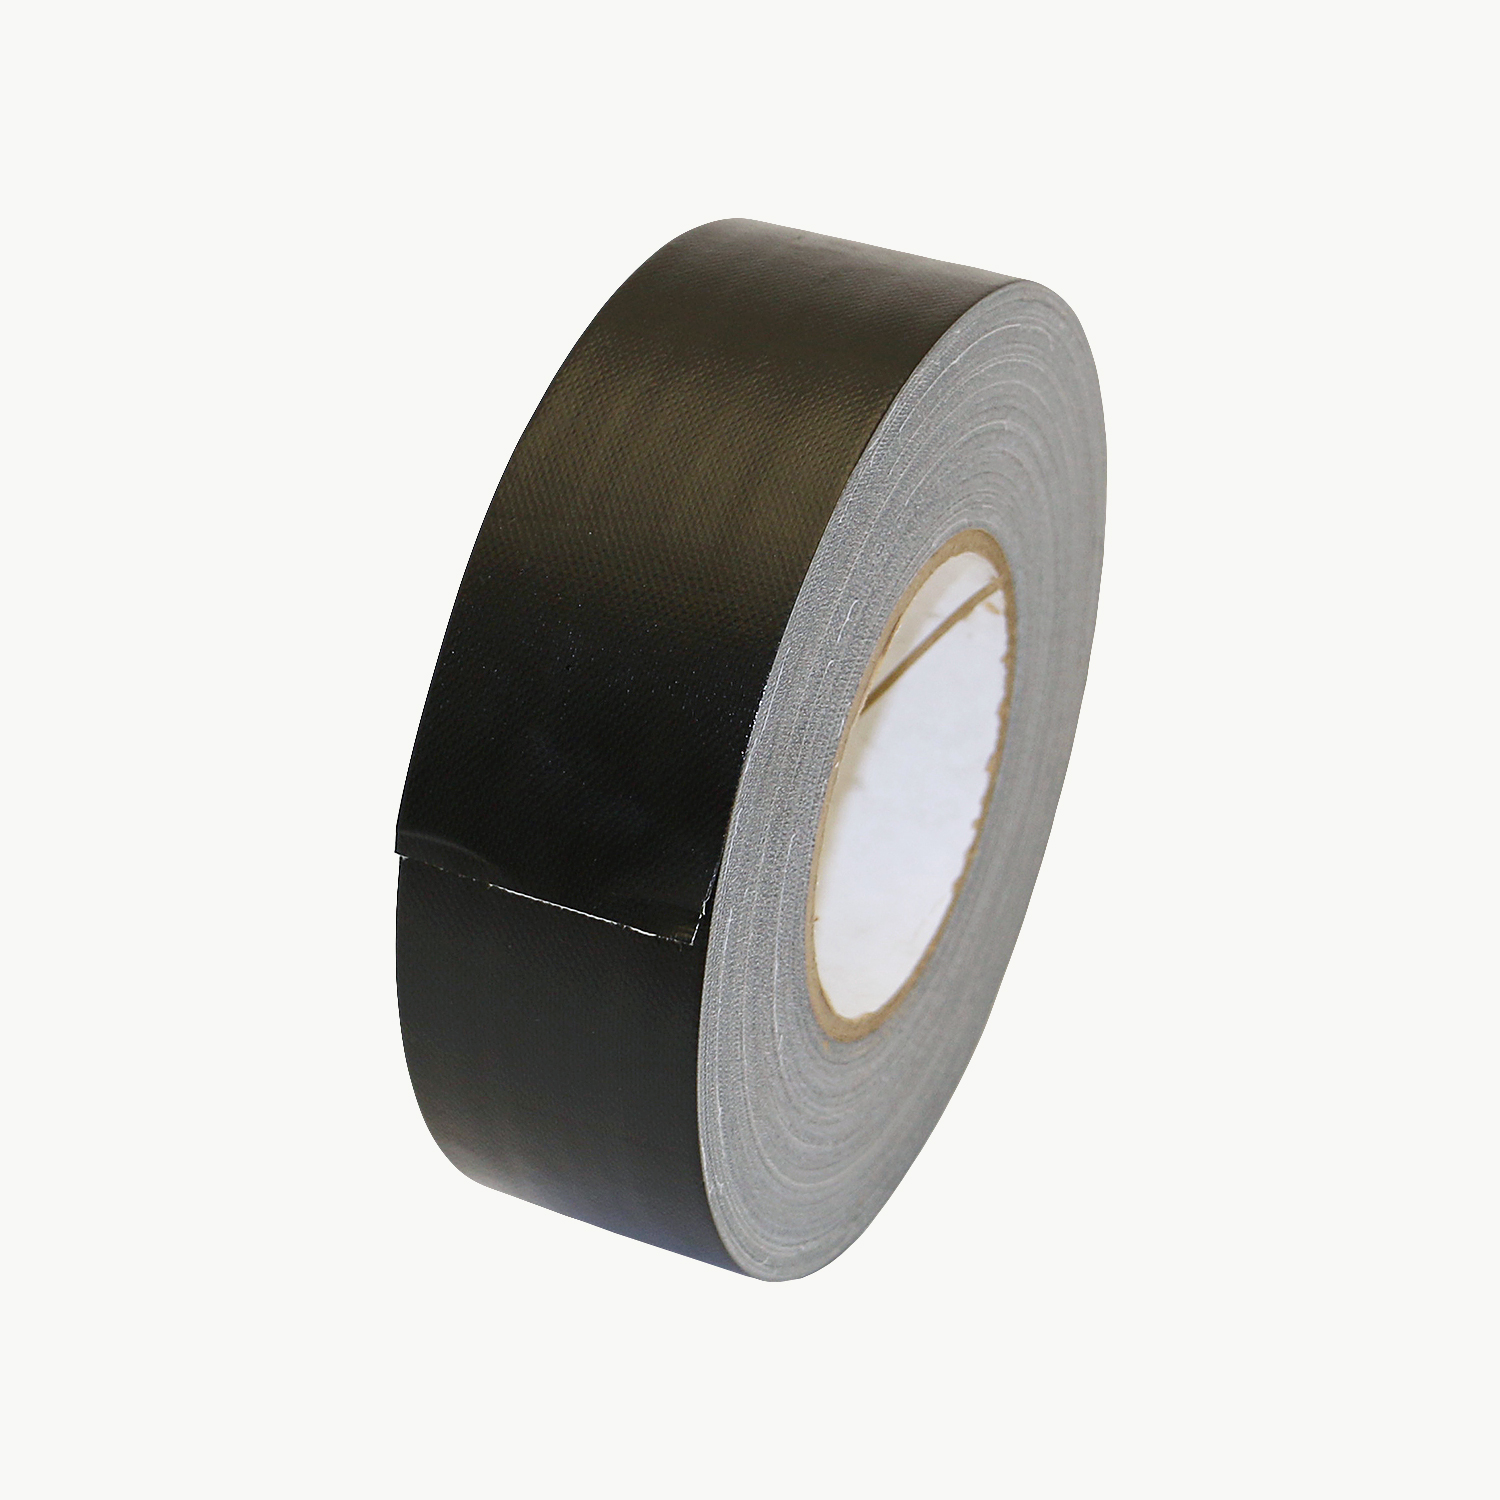 JVCC Contractor Grade Duct Tape (DT-CG)